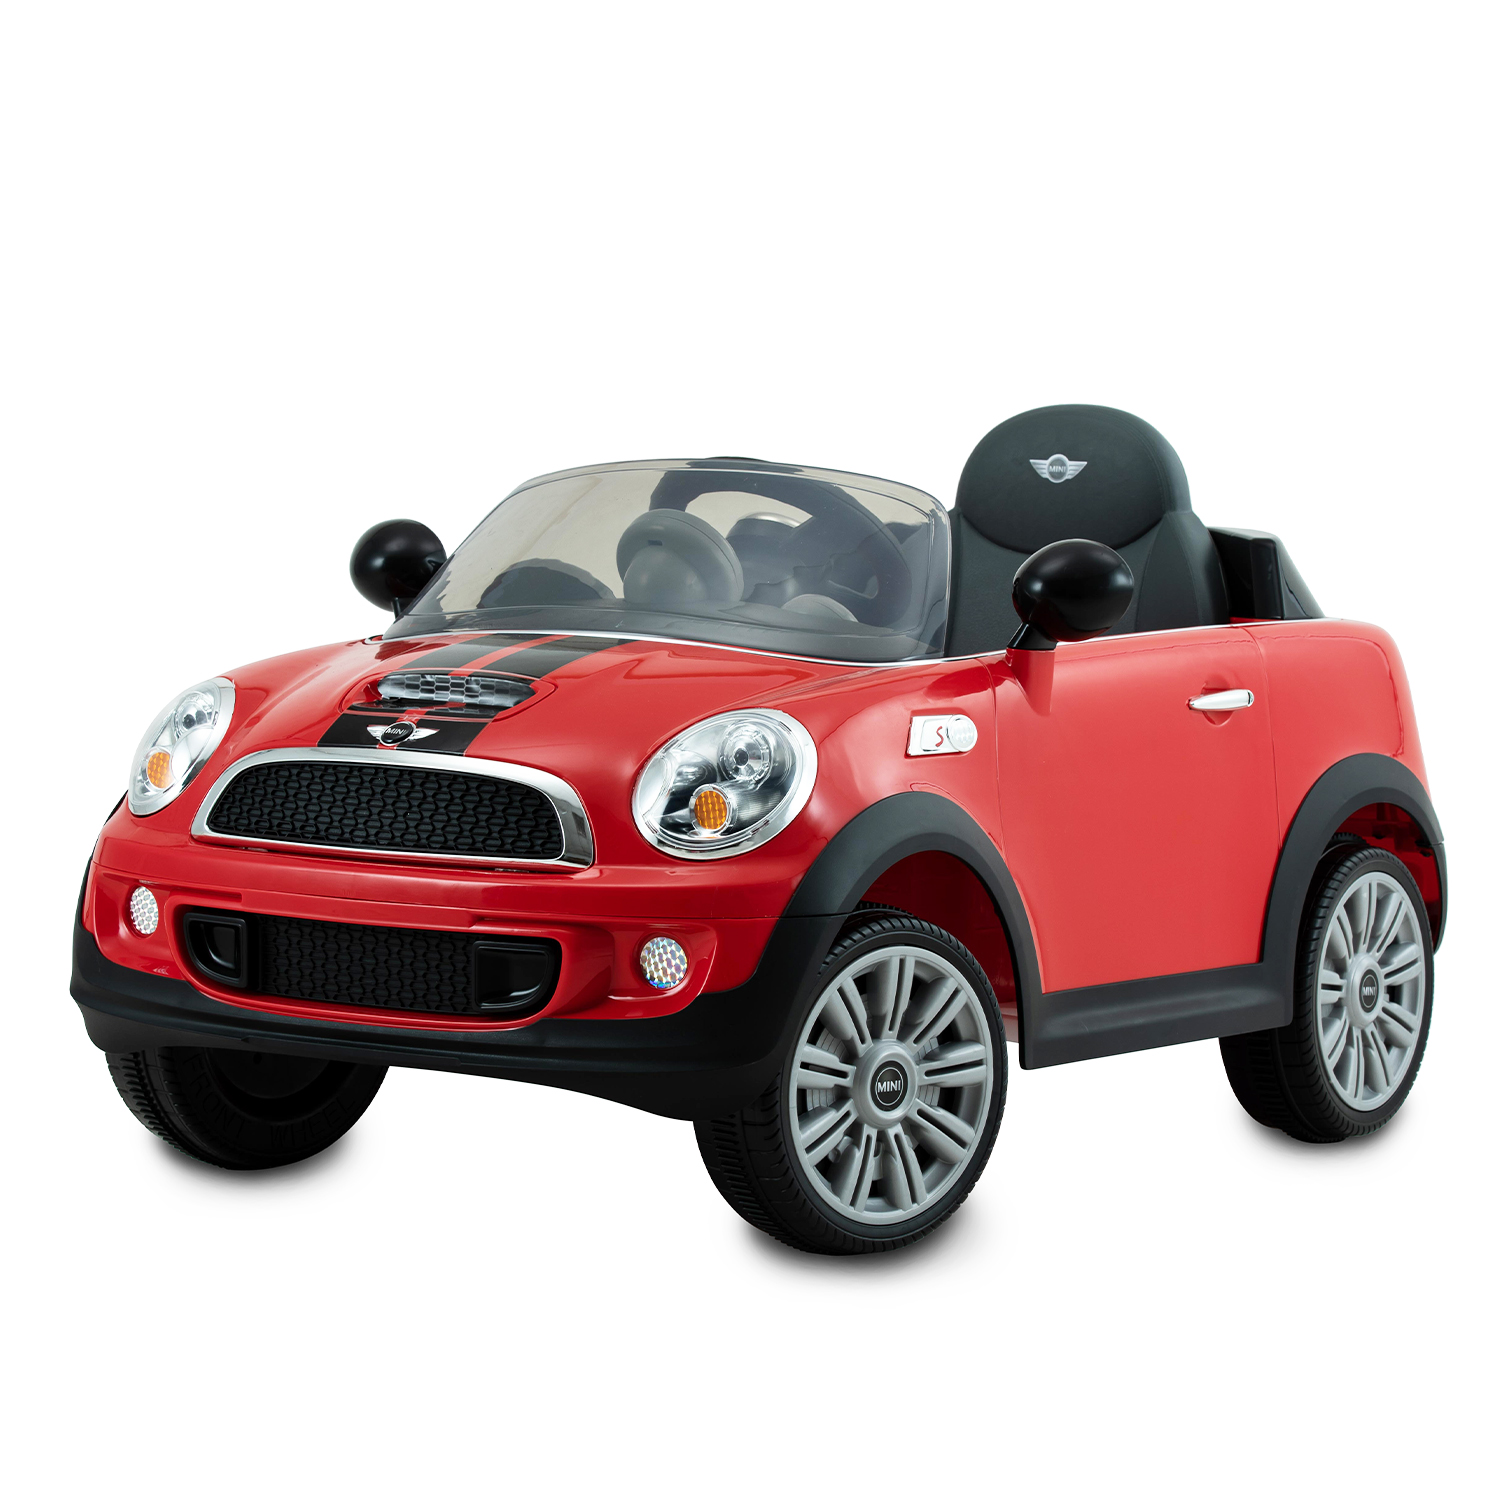 22412_W456B_MINI COOPER S ROADSTER, 6V, RC, red_Product_1